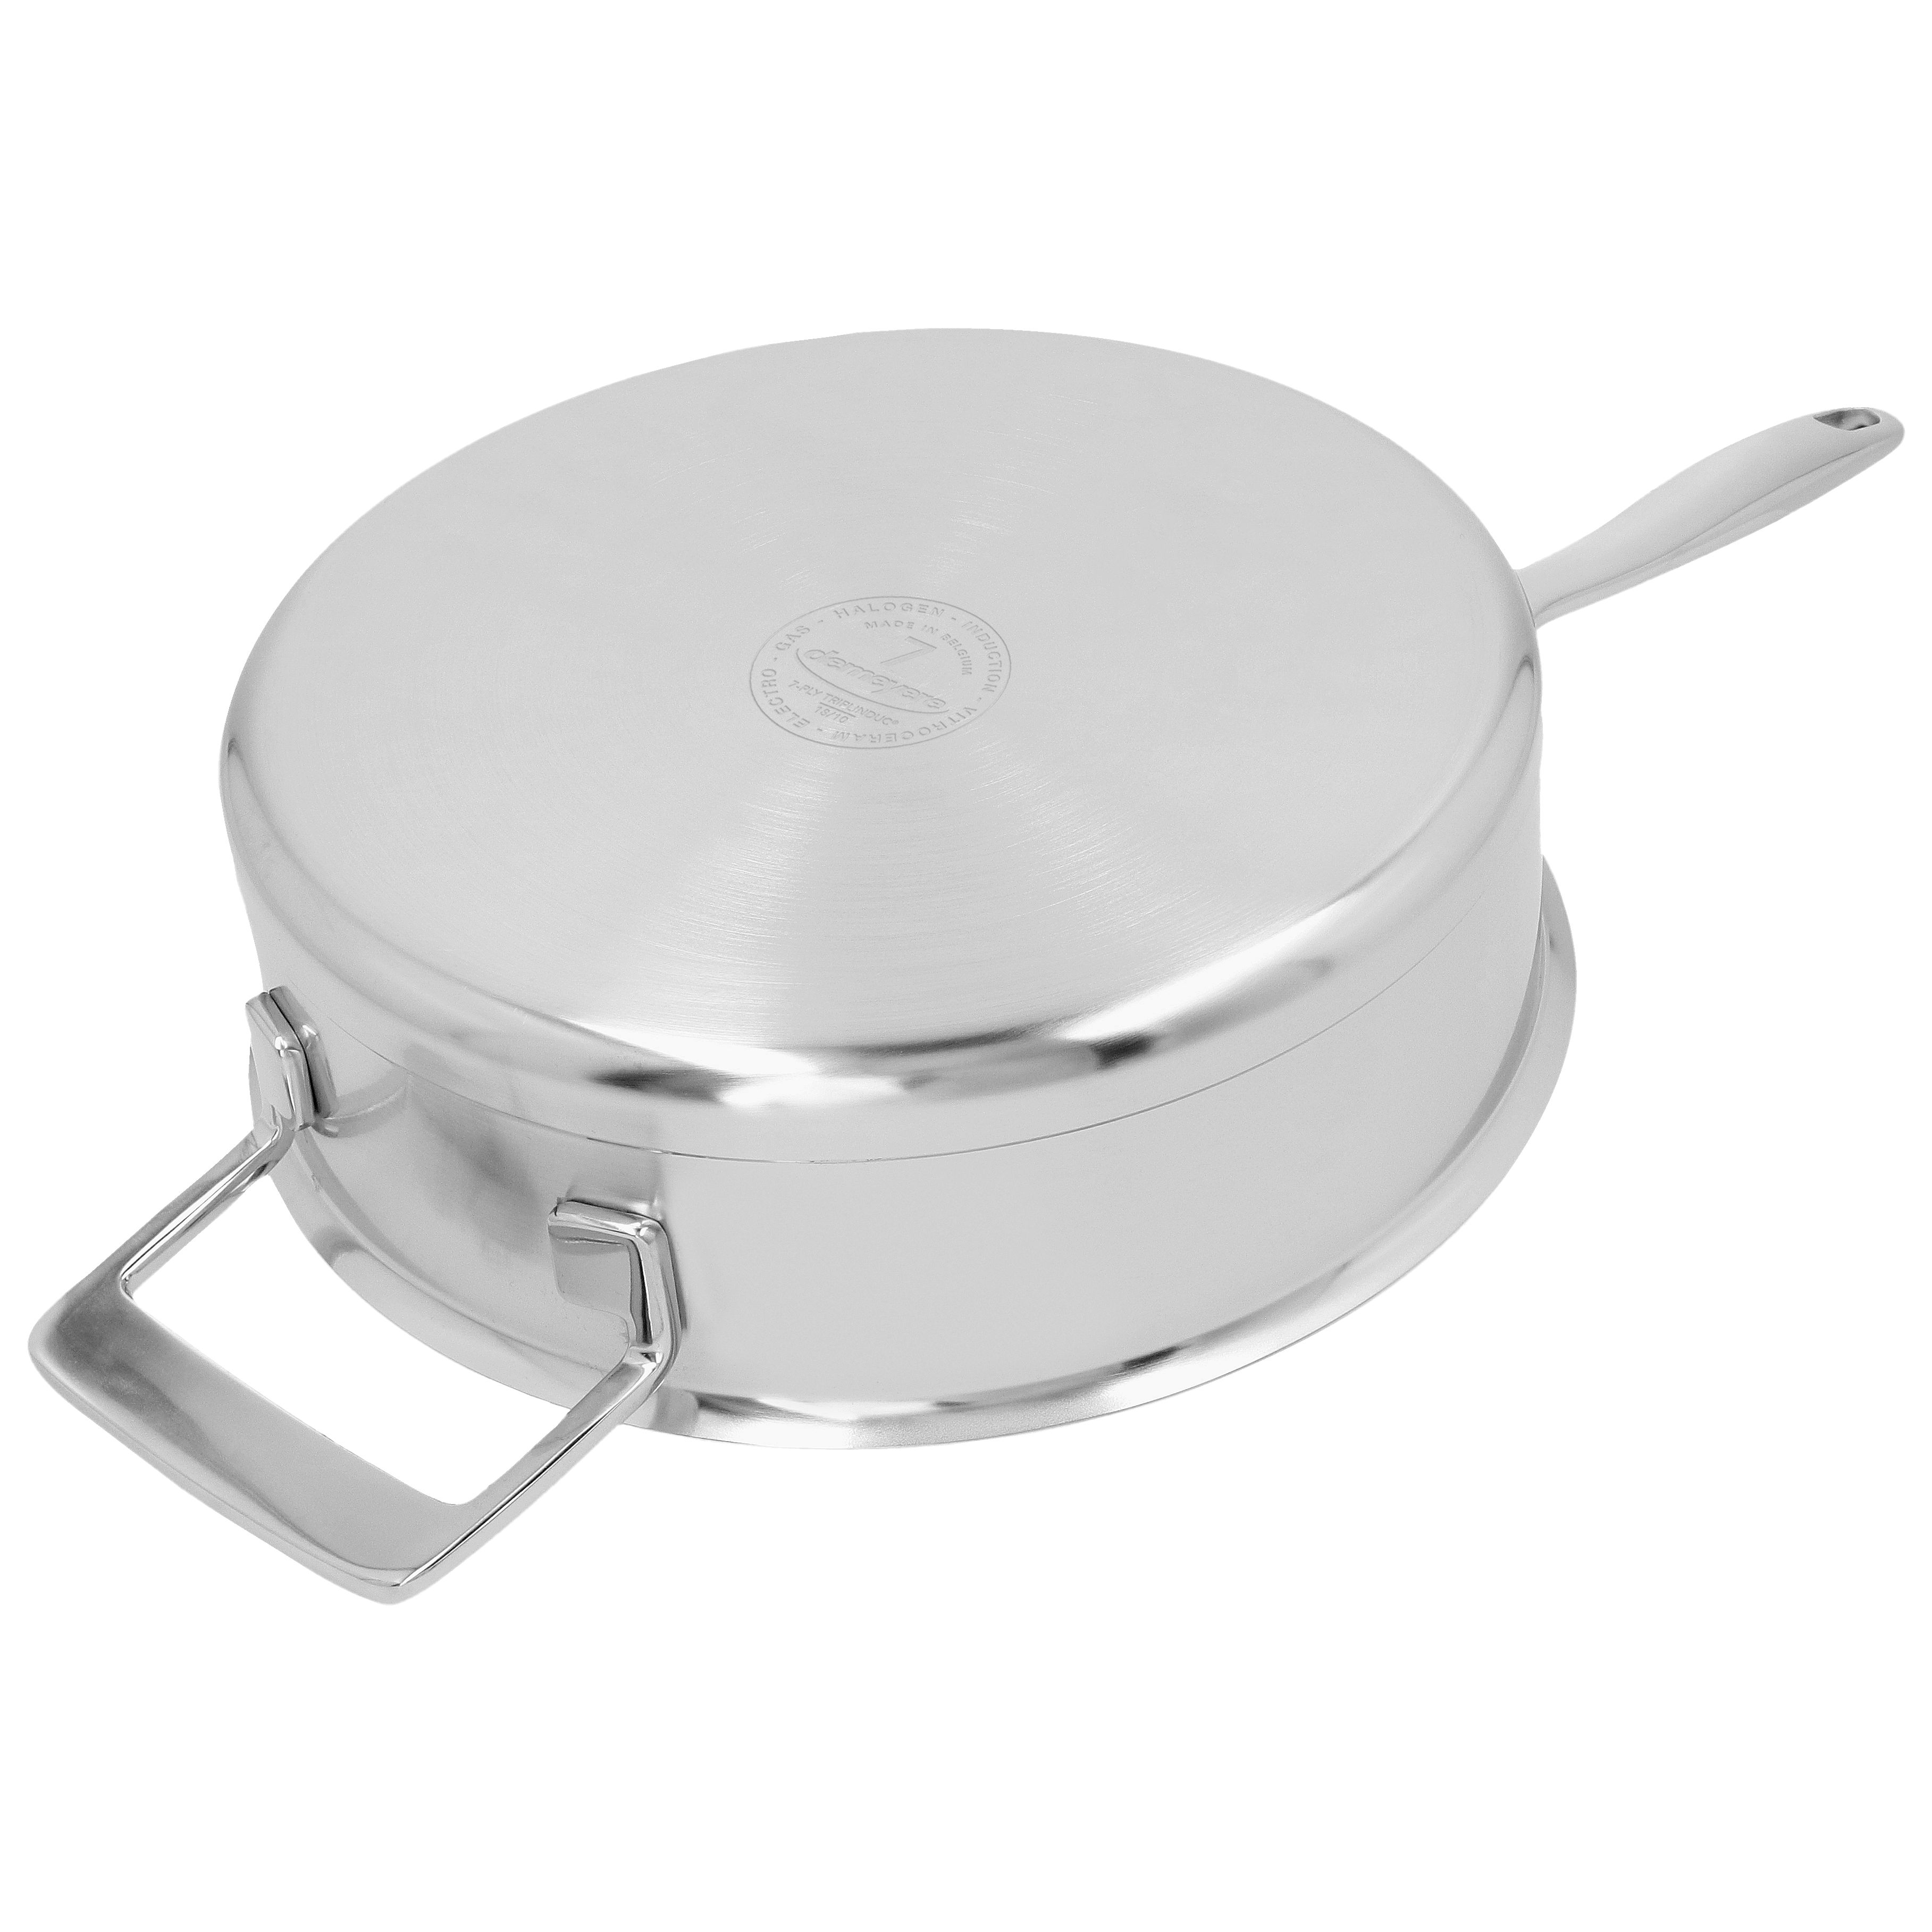 ZWILLING Spirit 3-ply 9.5-inch Stainless Steel Fry Pan with Lid, 9.5-inch -  Fry's Food Stores